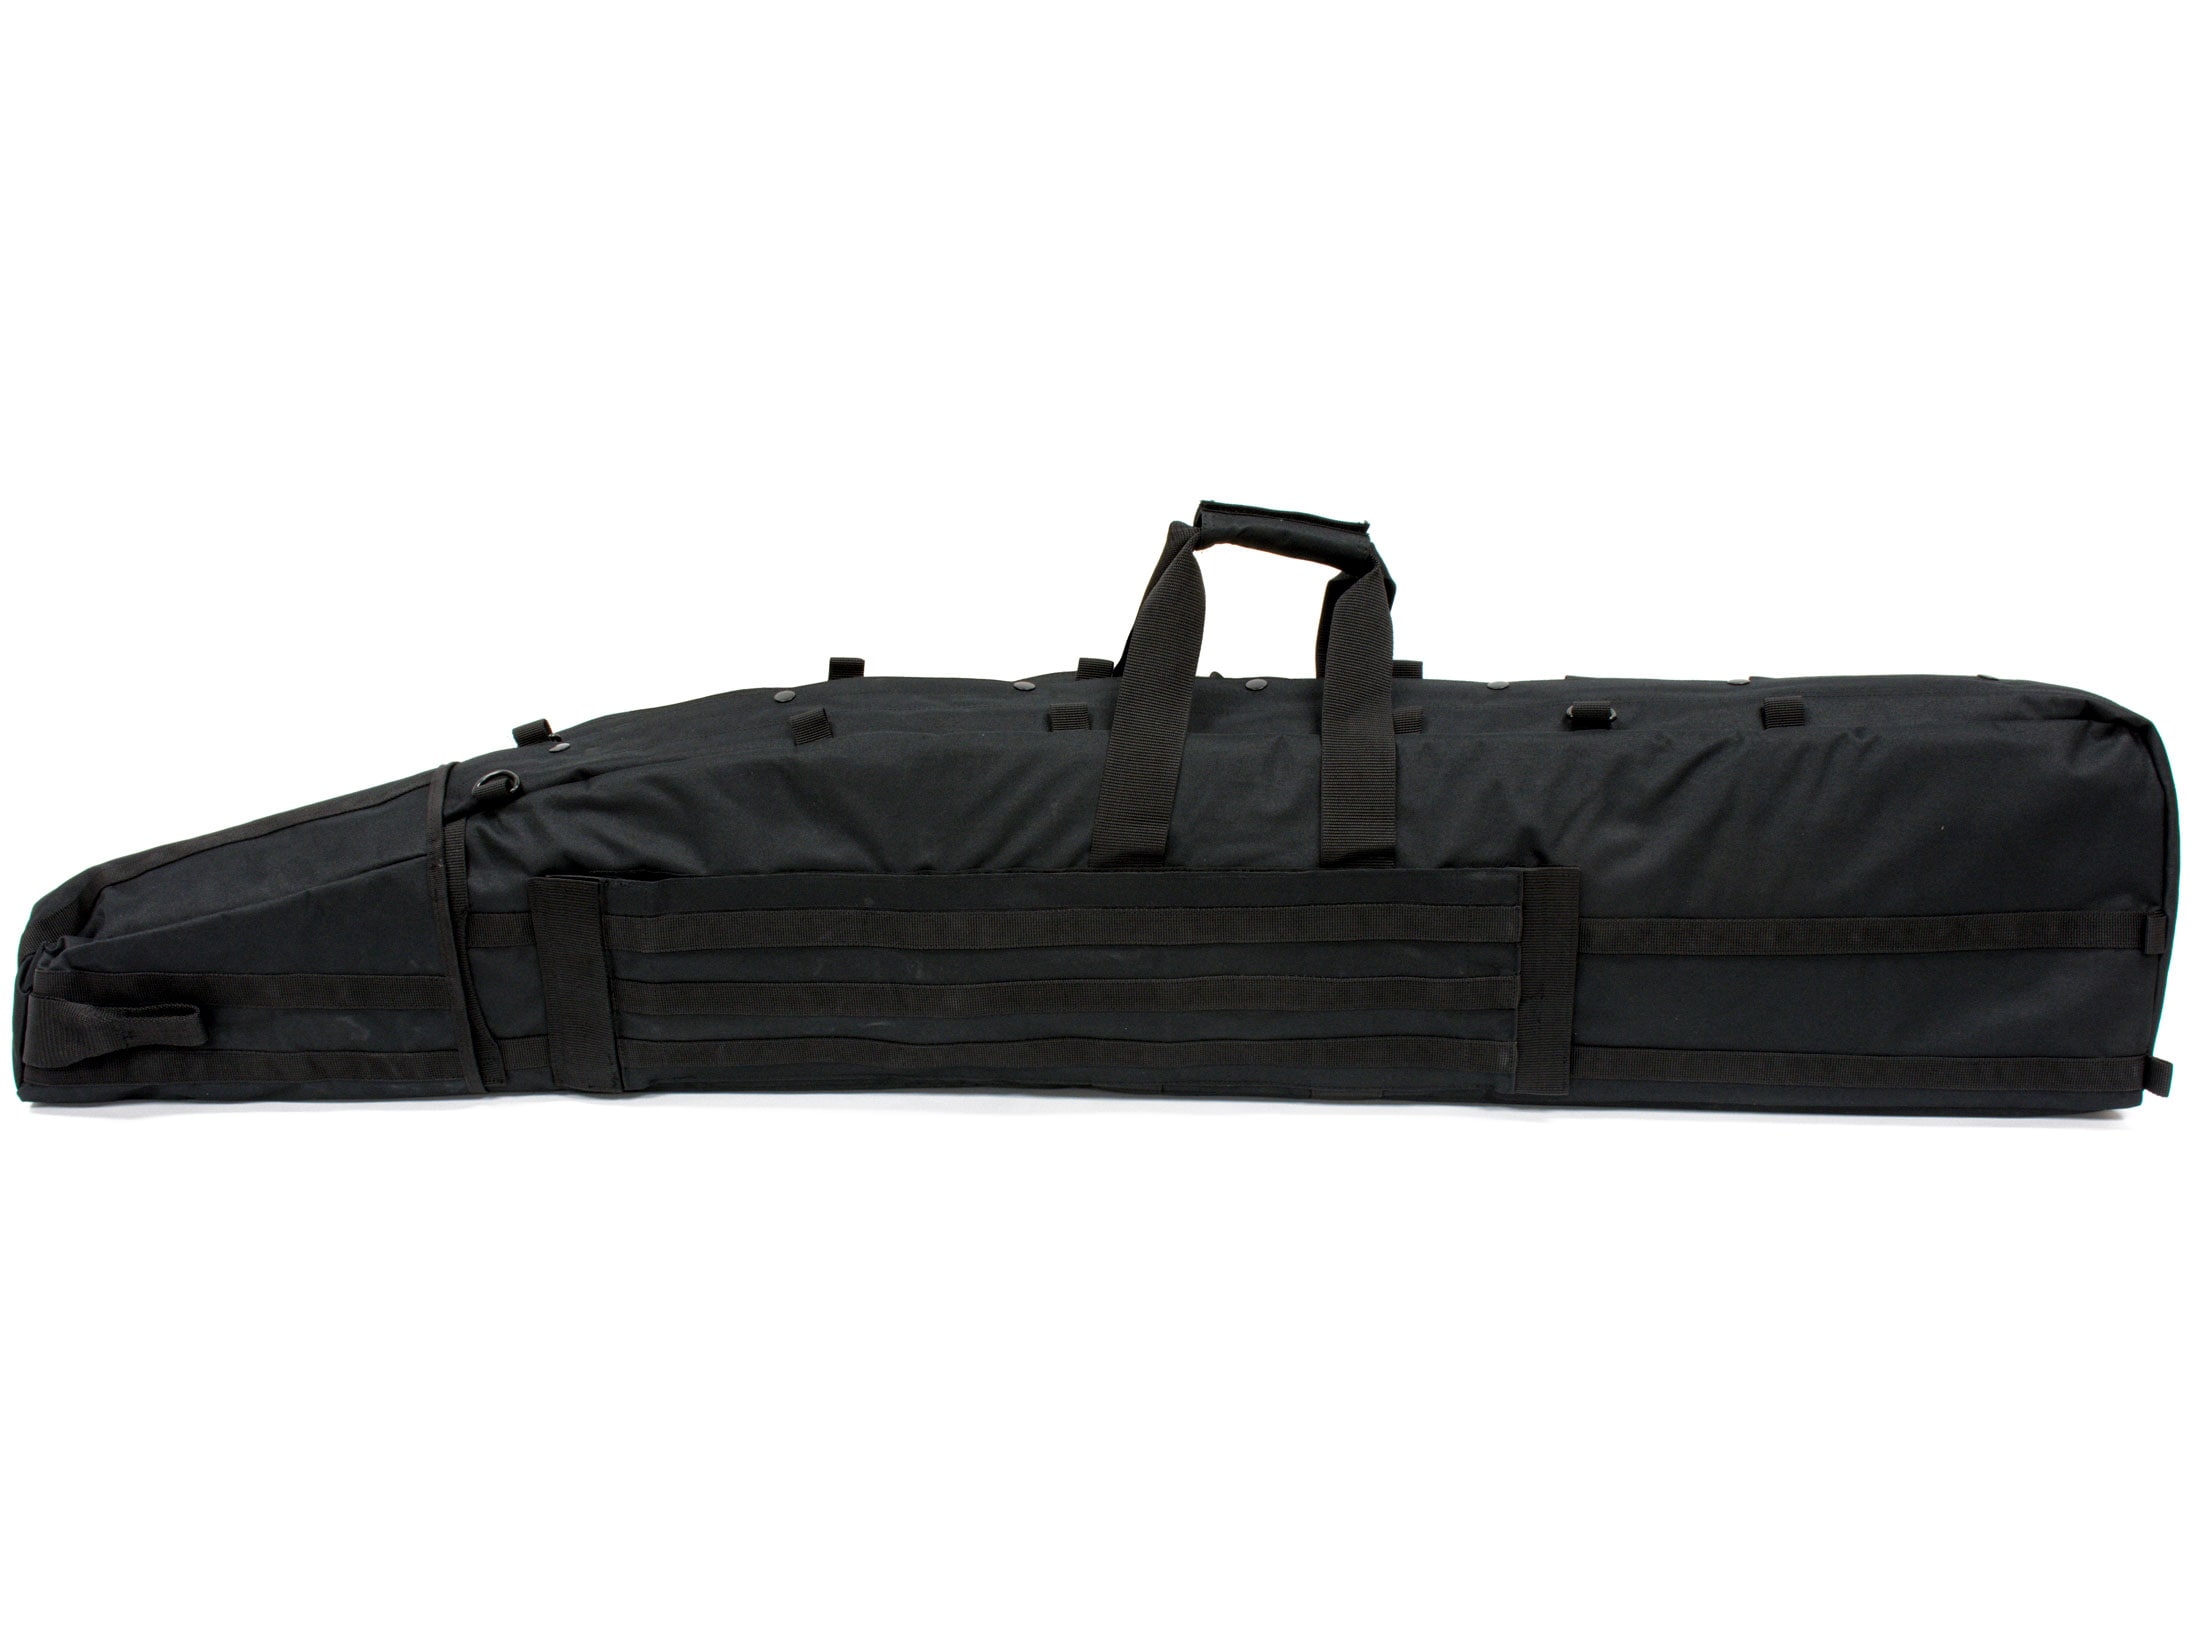 MidwayUSA Sniper Drag Bag Tactical Rifle Case For Sale